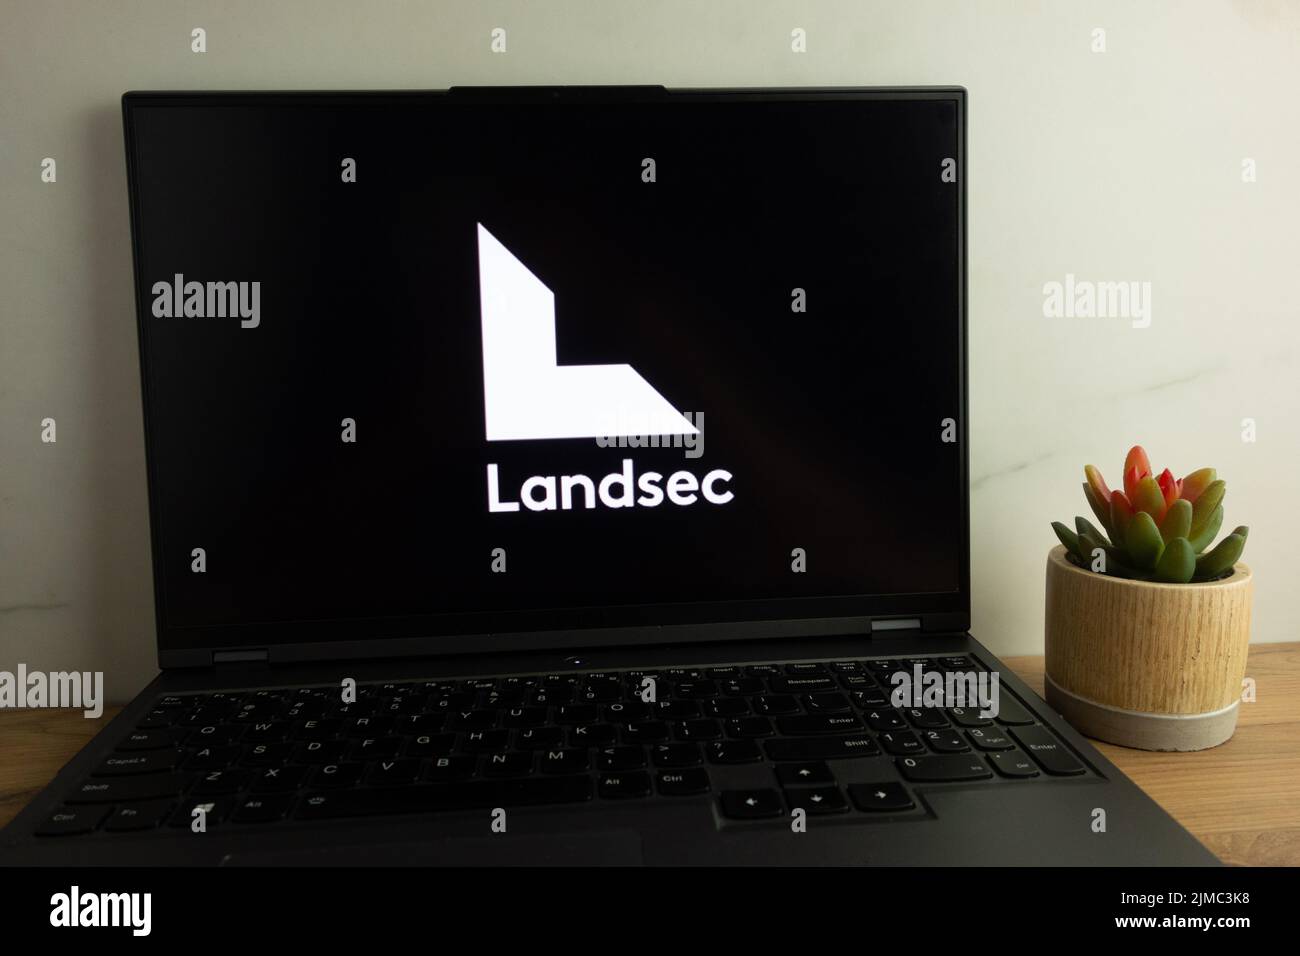 KONSKIE, POLAND - August 04, 2022: Land Securities Group plc (Landsec) commercial property development and investment company logo displayed on laptop Stock Photo